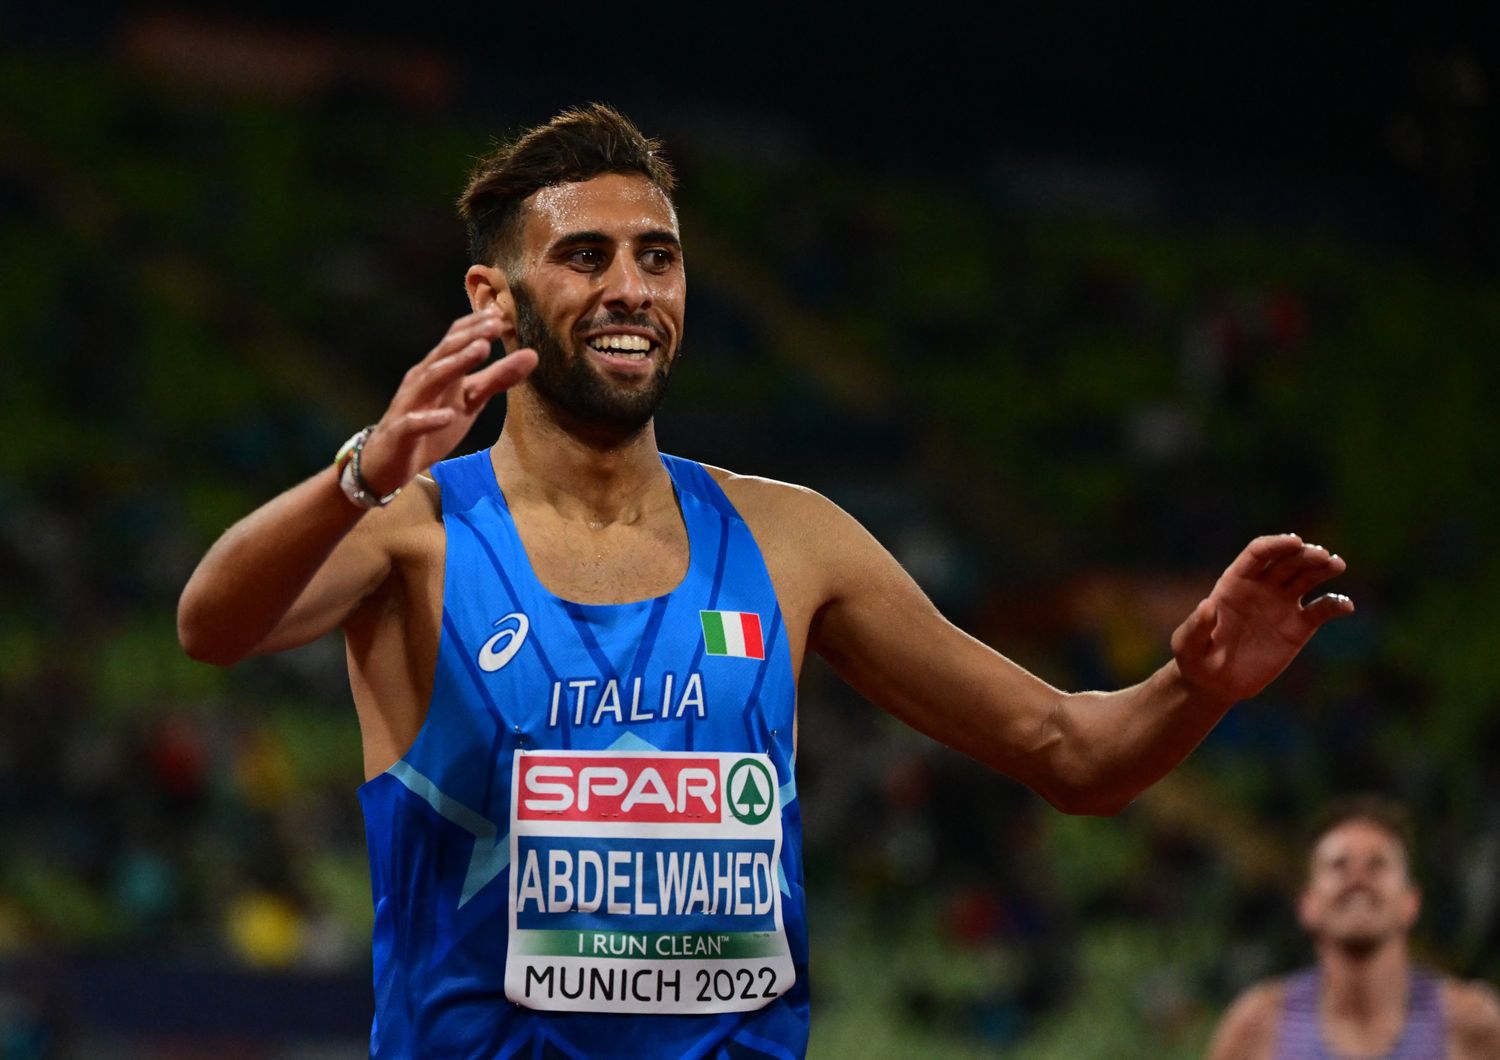 Atletica Abdelwahed amaro positivo doping